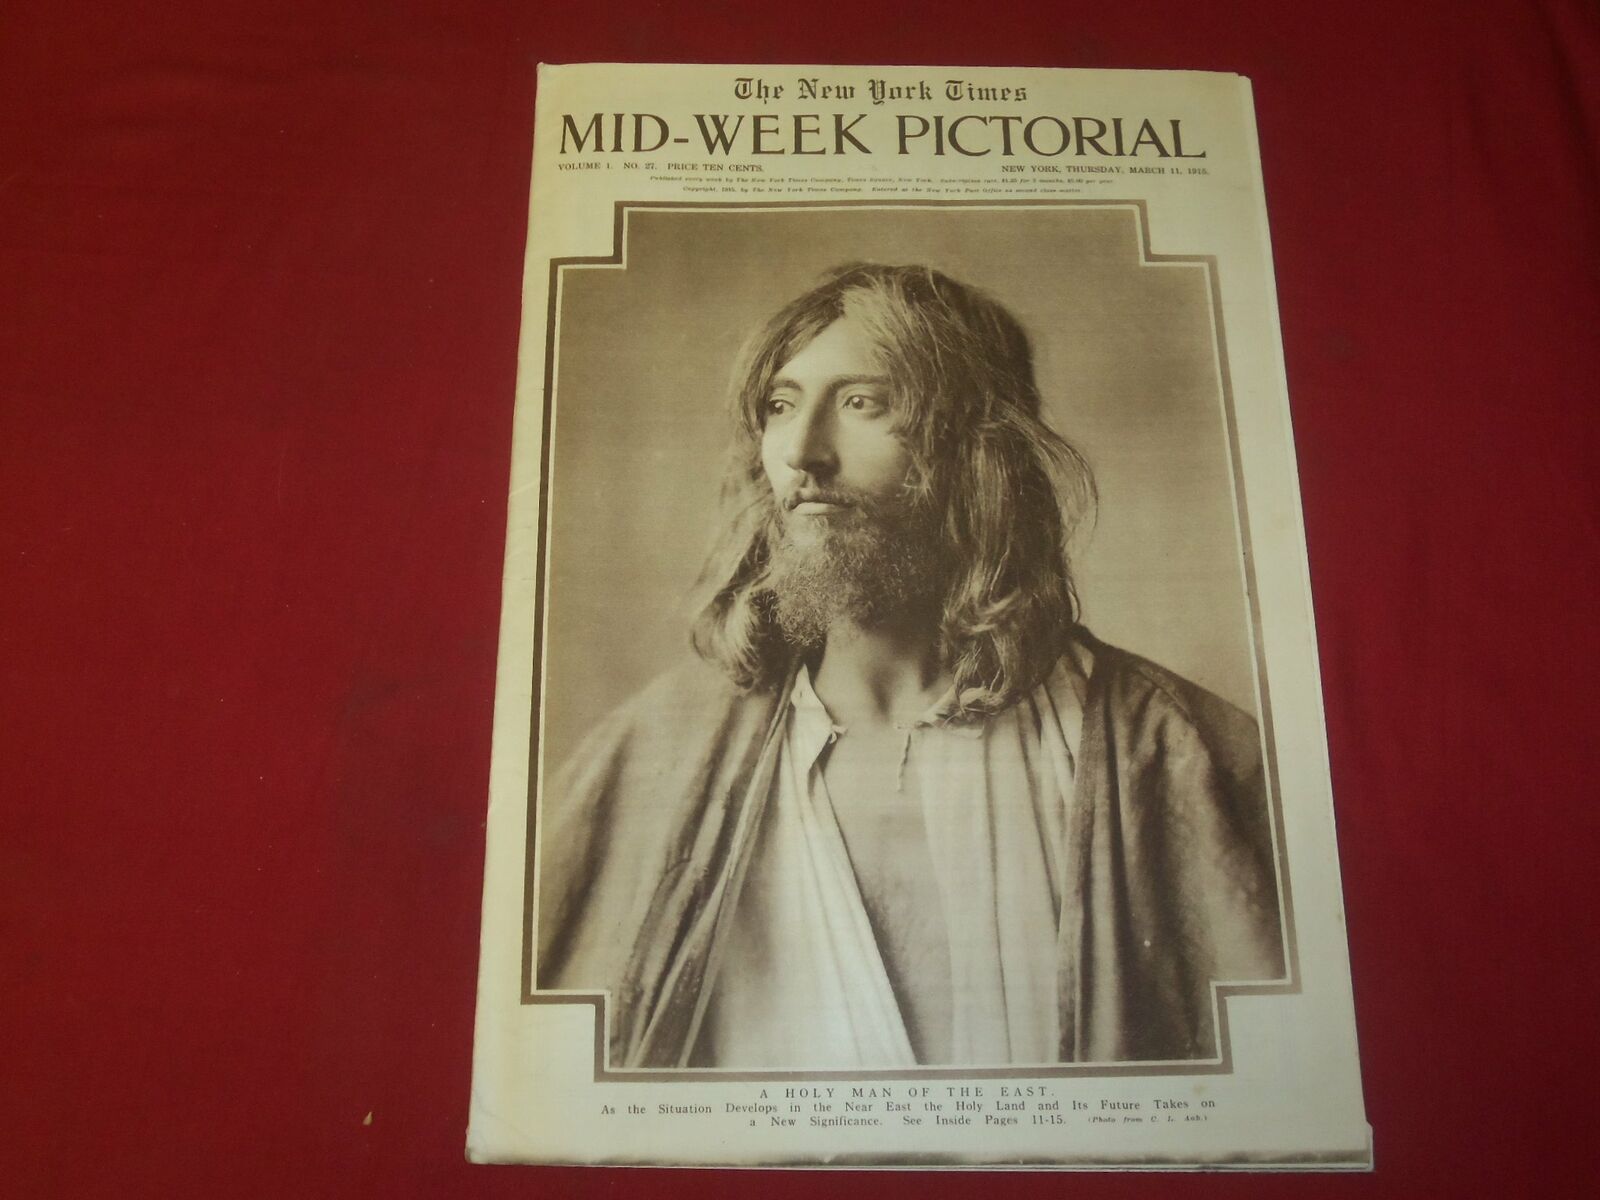 1915 MARCH 11 NY TIMES PICTORIAL SECTION - A HOLY MAN OF THE EAST - NP 3950